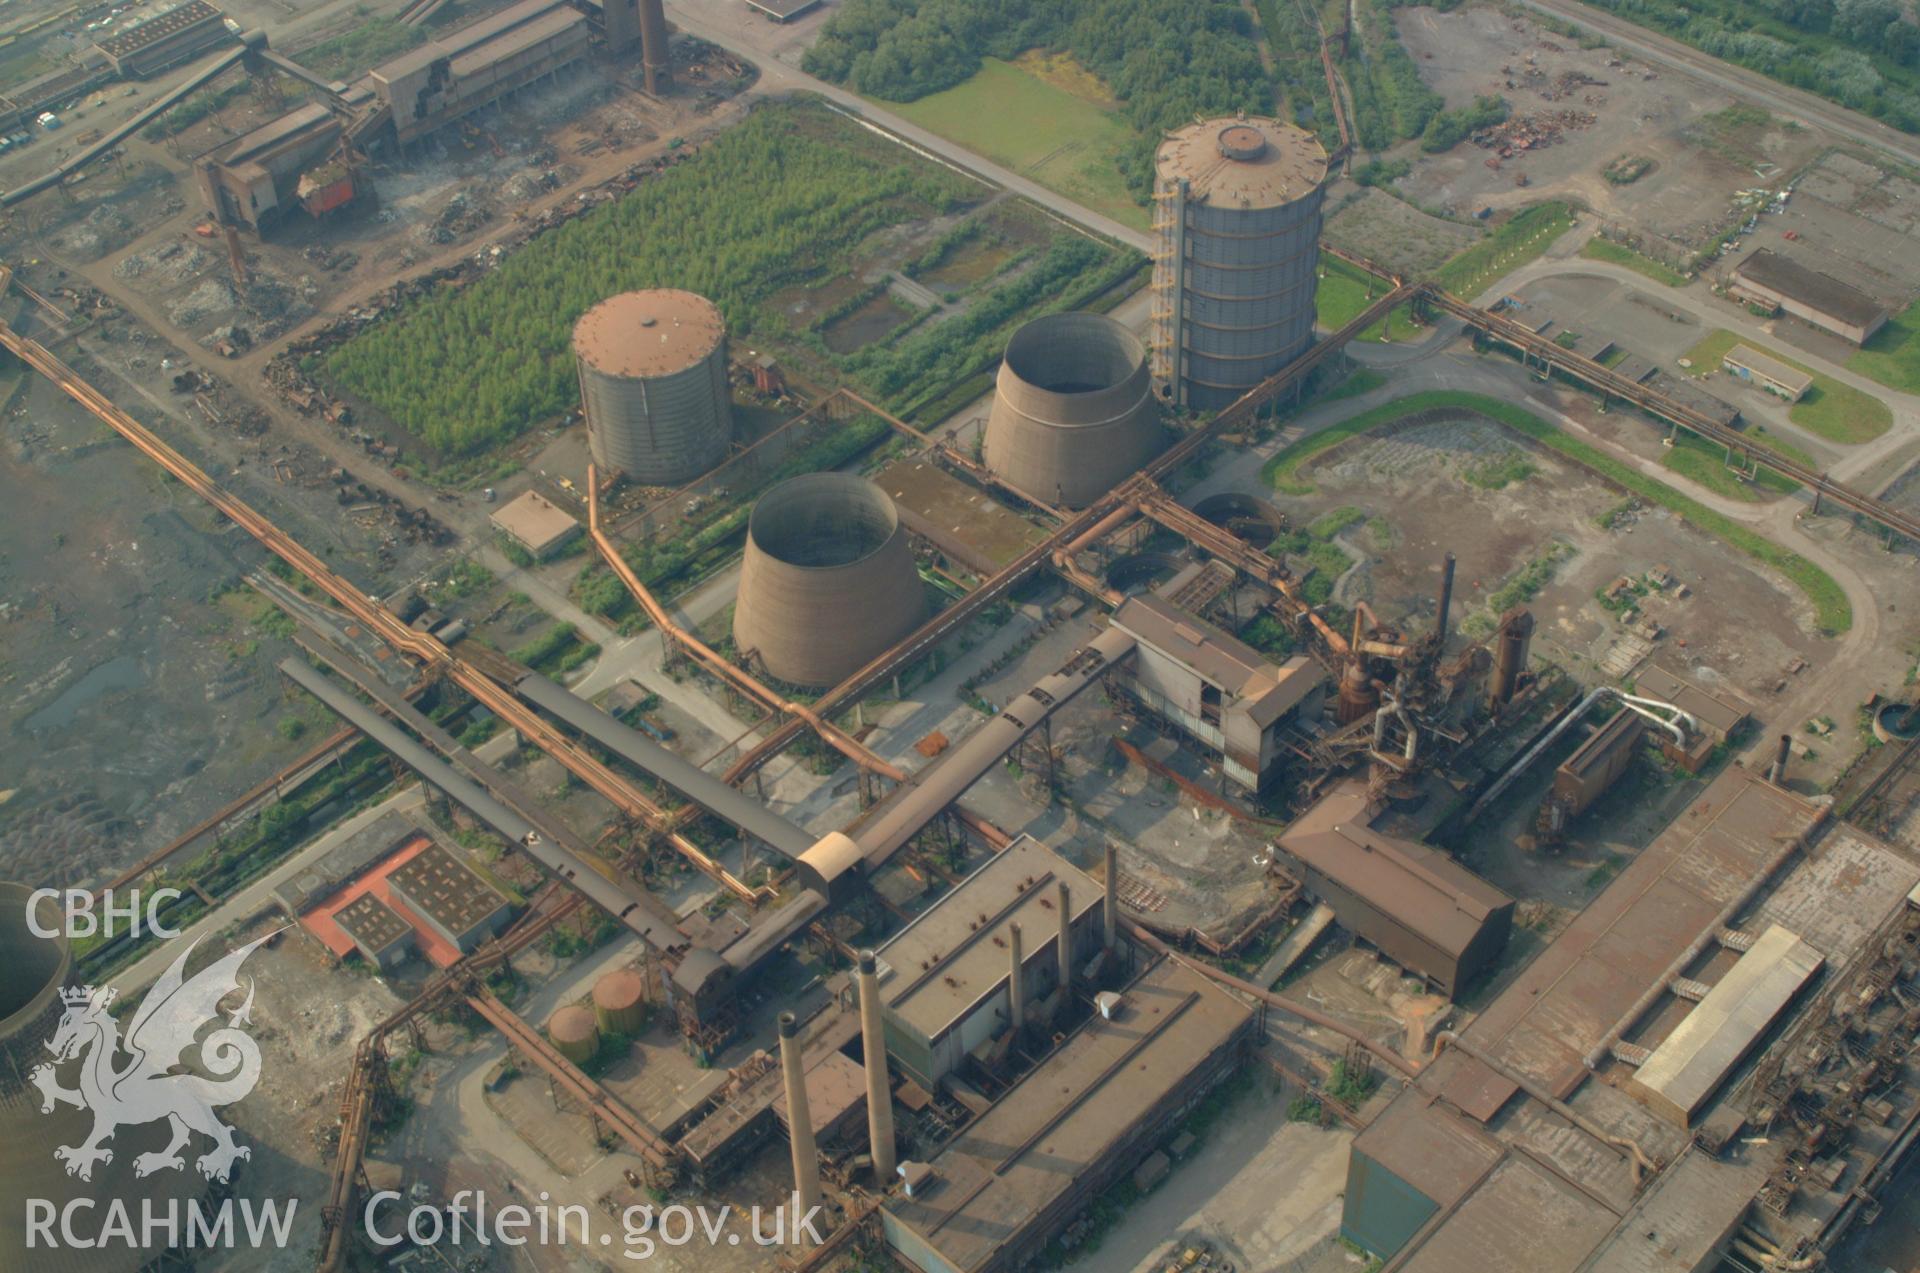 RCAHMW colour oblique aerial photograph of Llanwern Steelworks, at Industrial Complex, Newport. Taken on 26 May 2004 by Toby Driver